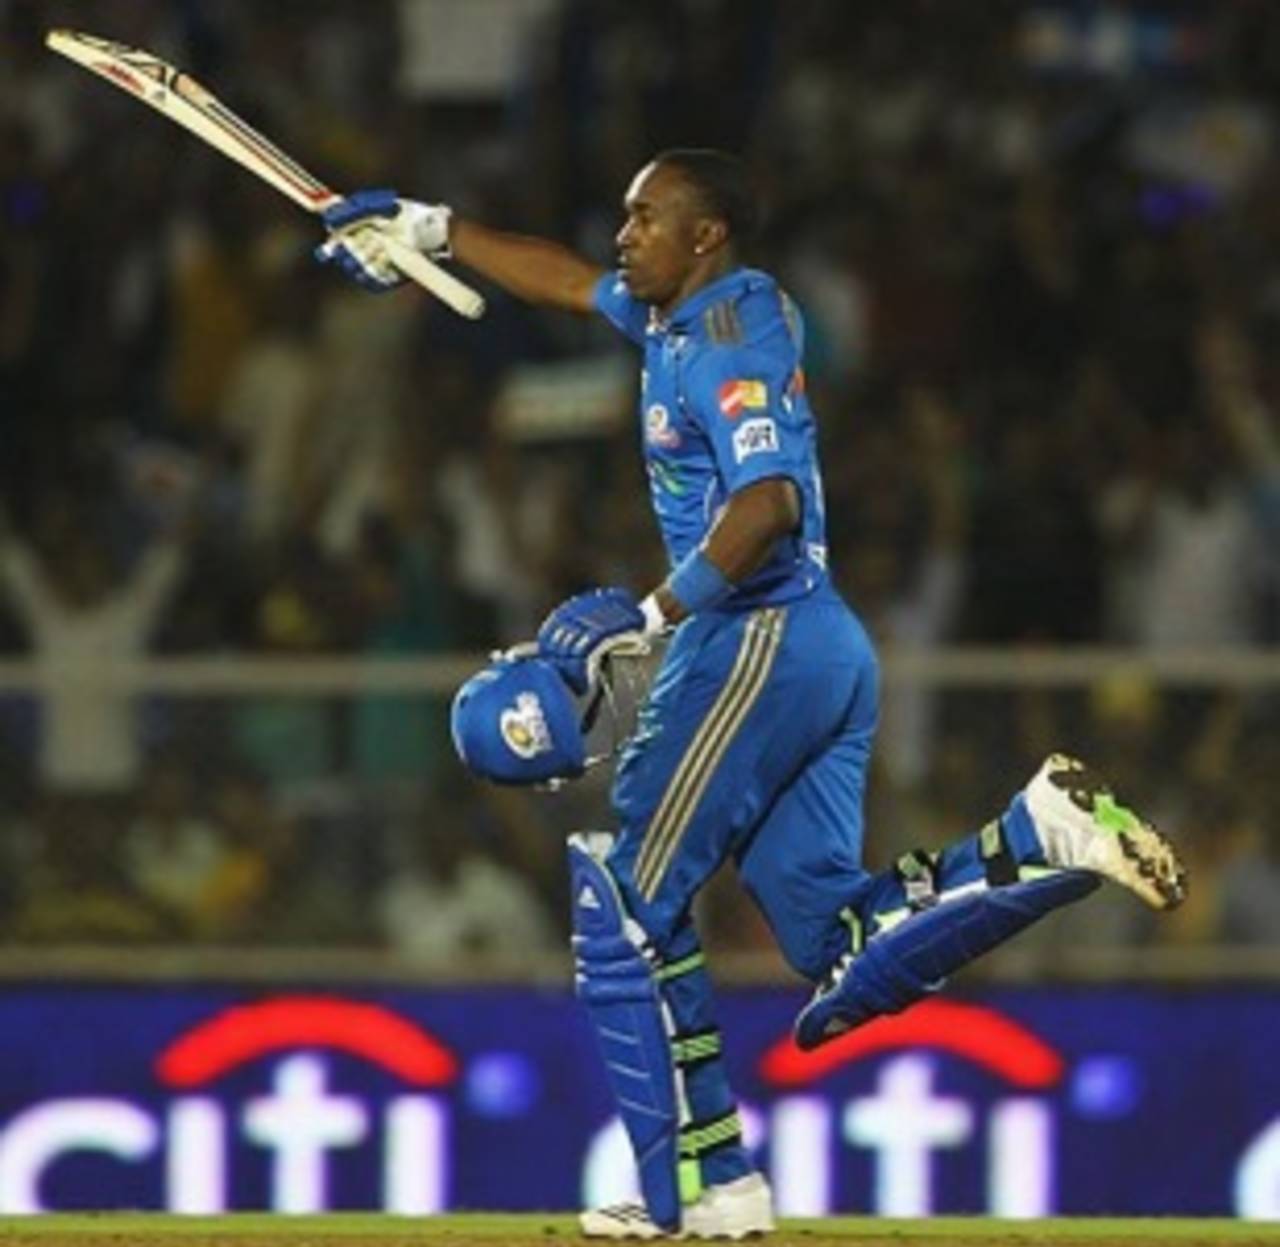 Dwayne Bravo, who plays for the Mumbai Indians in the IPL, and Victoria in the Twenty20 Big Bash, will miss the Caribbean Twenty20 Championship&nbsp;&nbsp;&bull;&nbsp;&nbsp;Indian Premier League